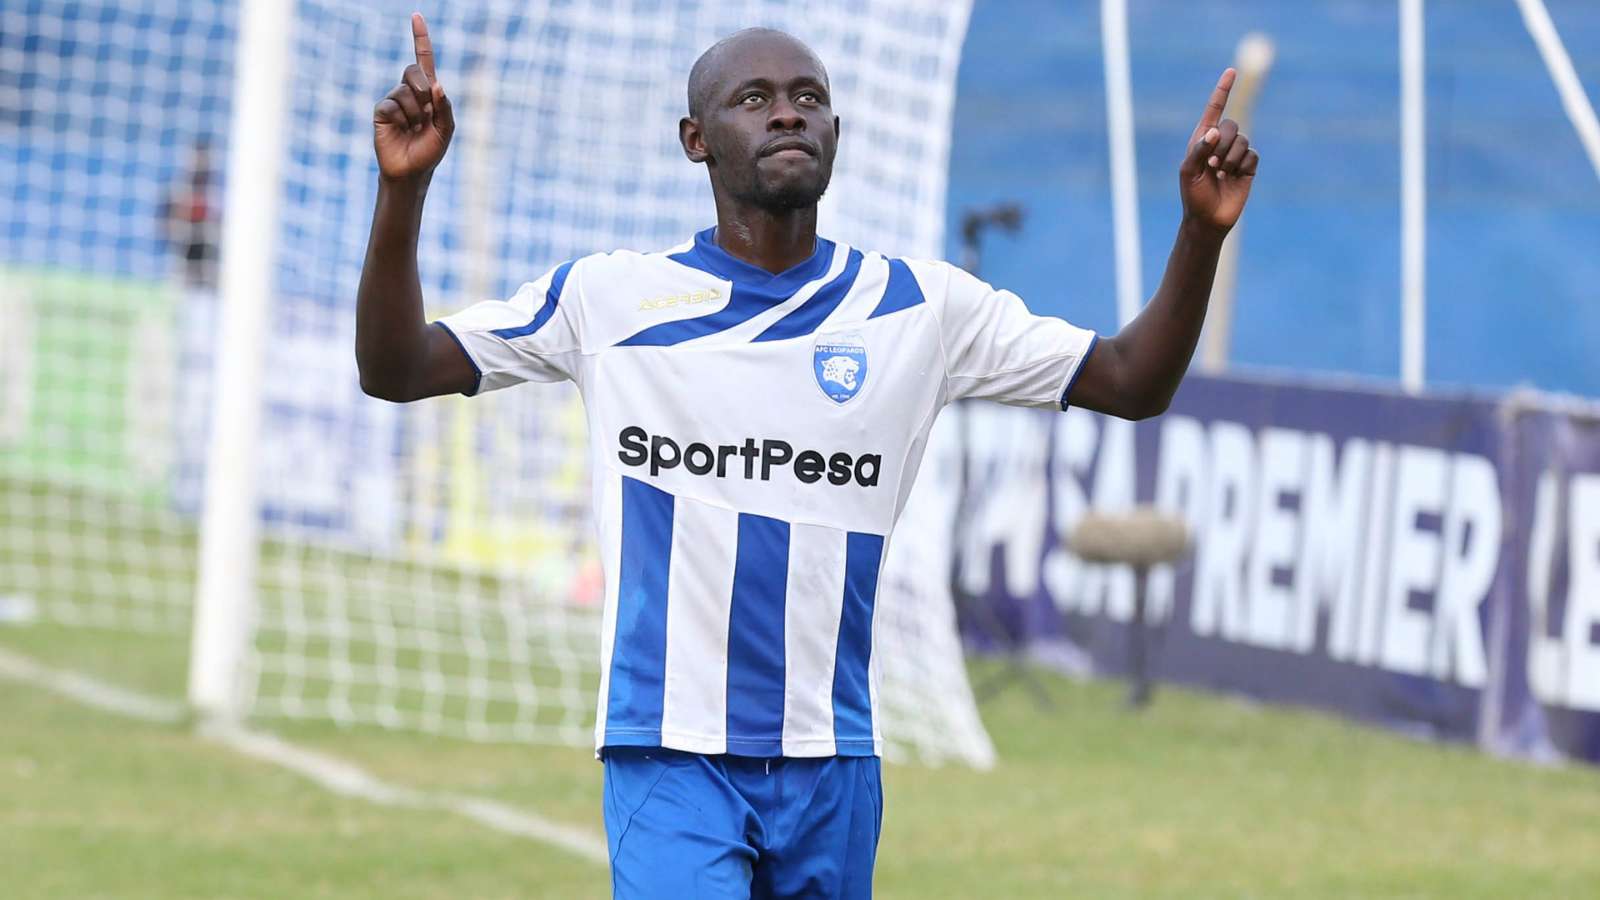 AFC Leopards striker Ezekiel Odera to remain at KCB for another season | KPL Transfers